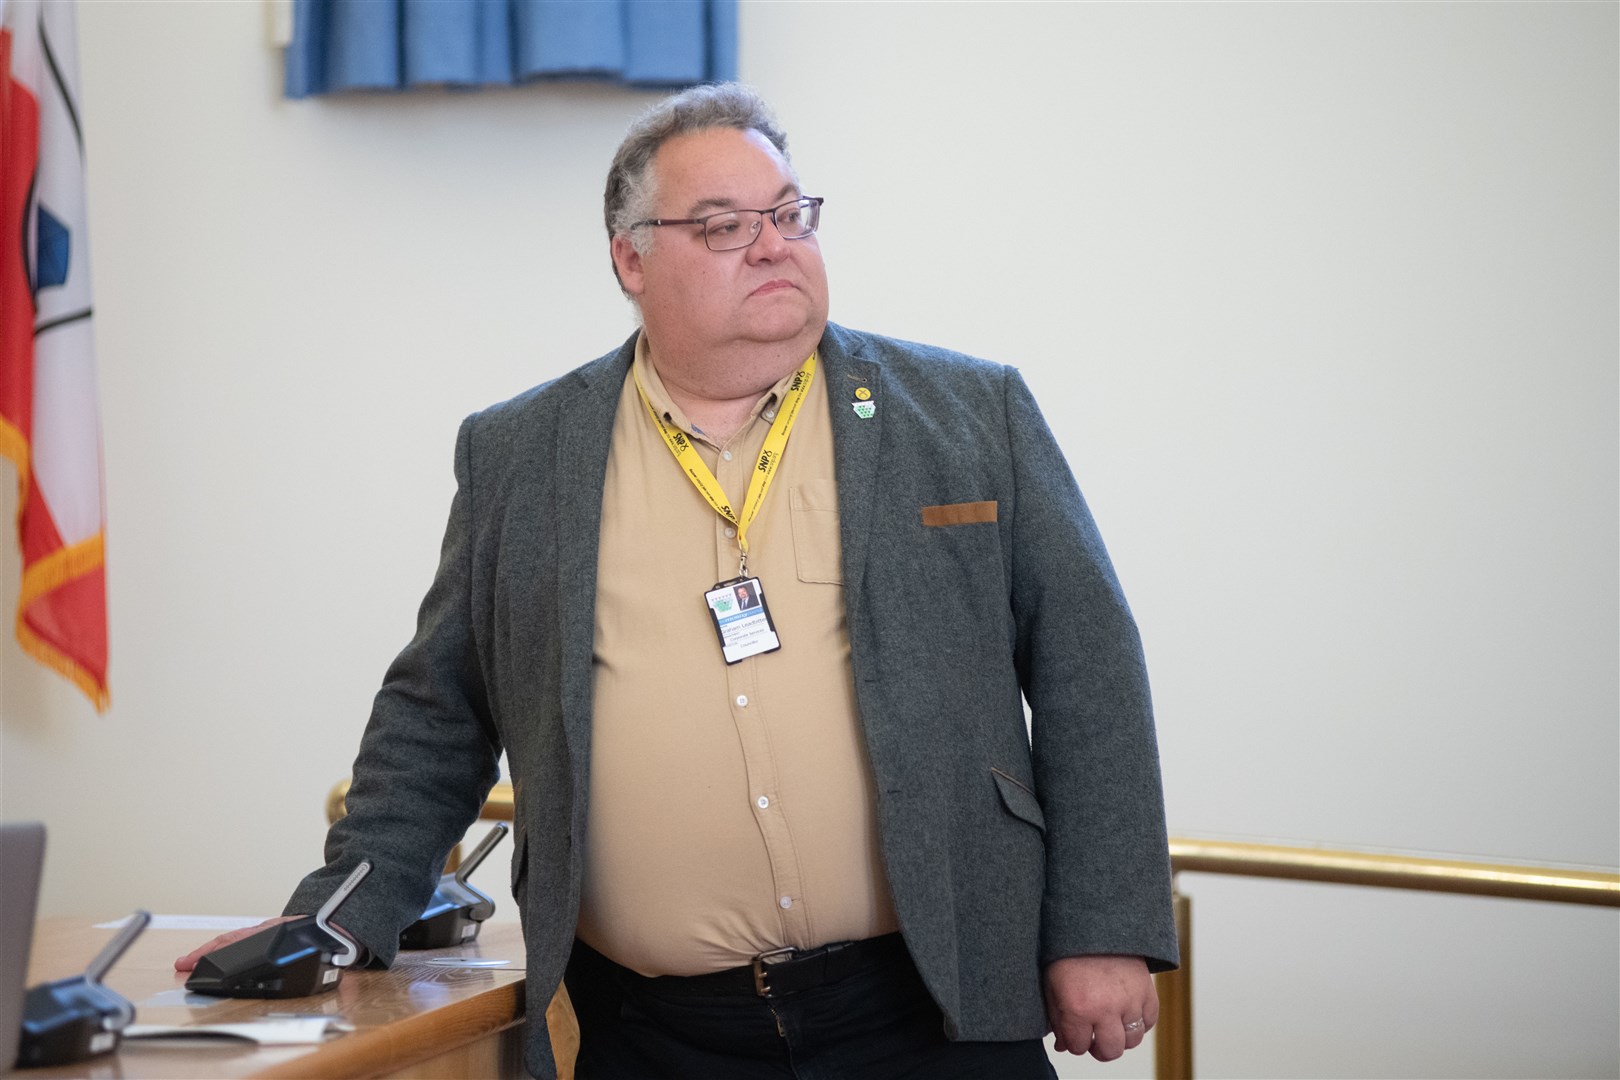 SNP councillor Graham Leadbitter said the loss was being "keenly felt" by the people of Moray. Picture: Daniel Forsyth